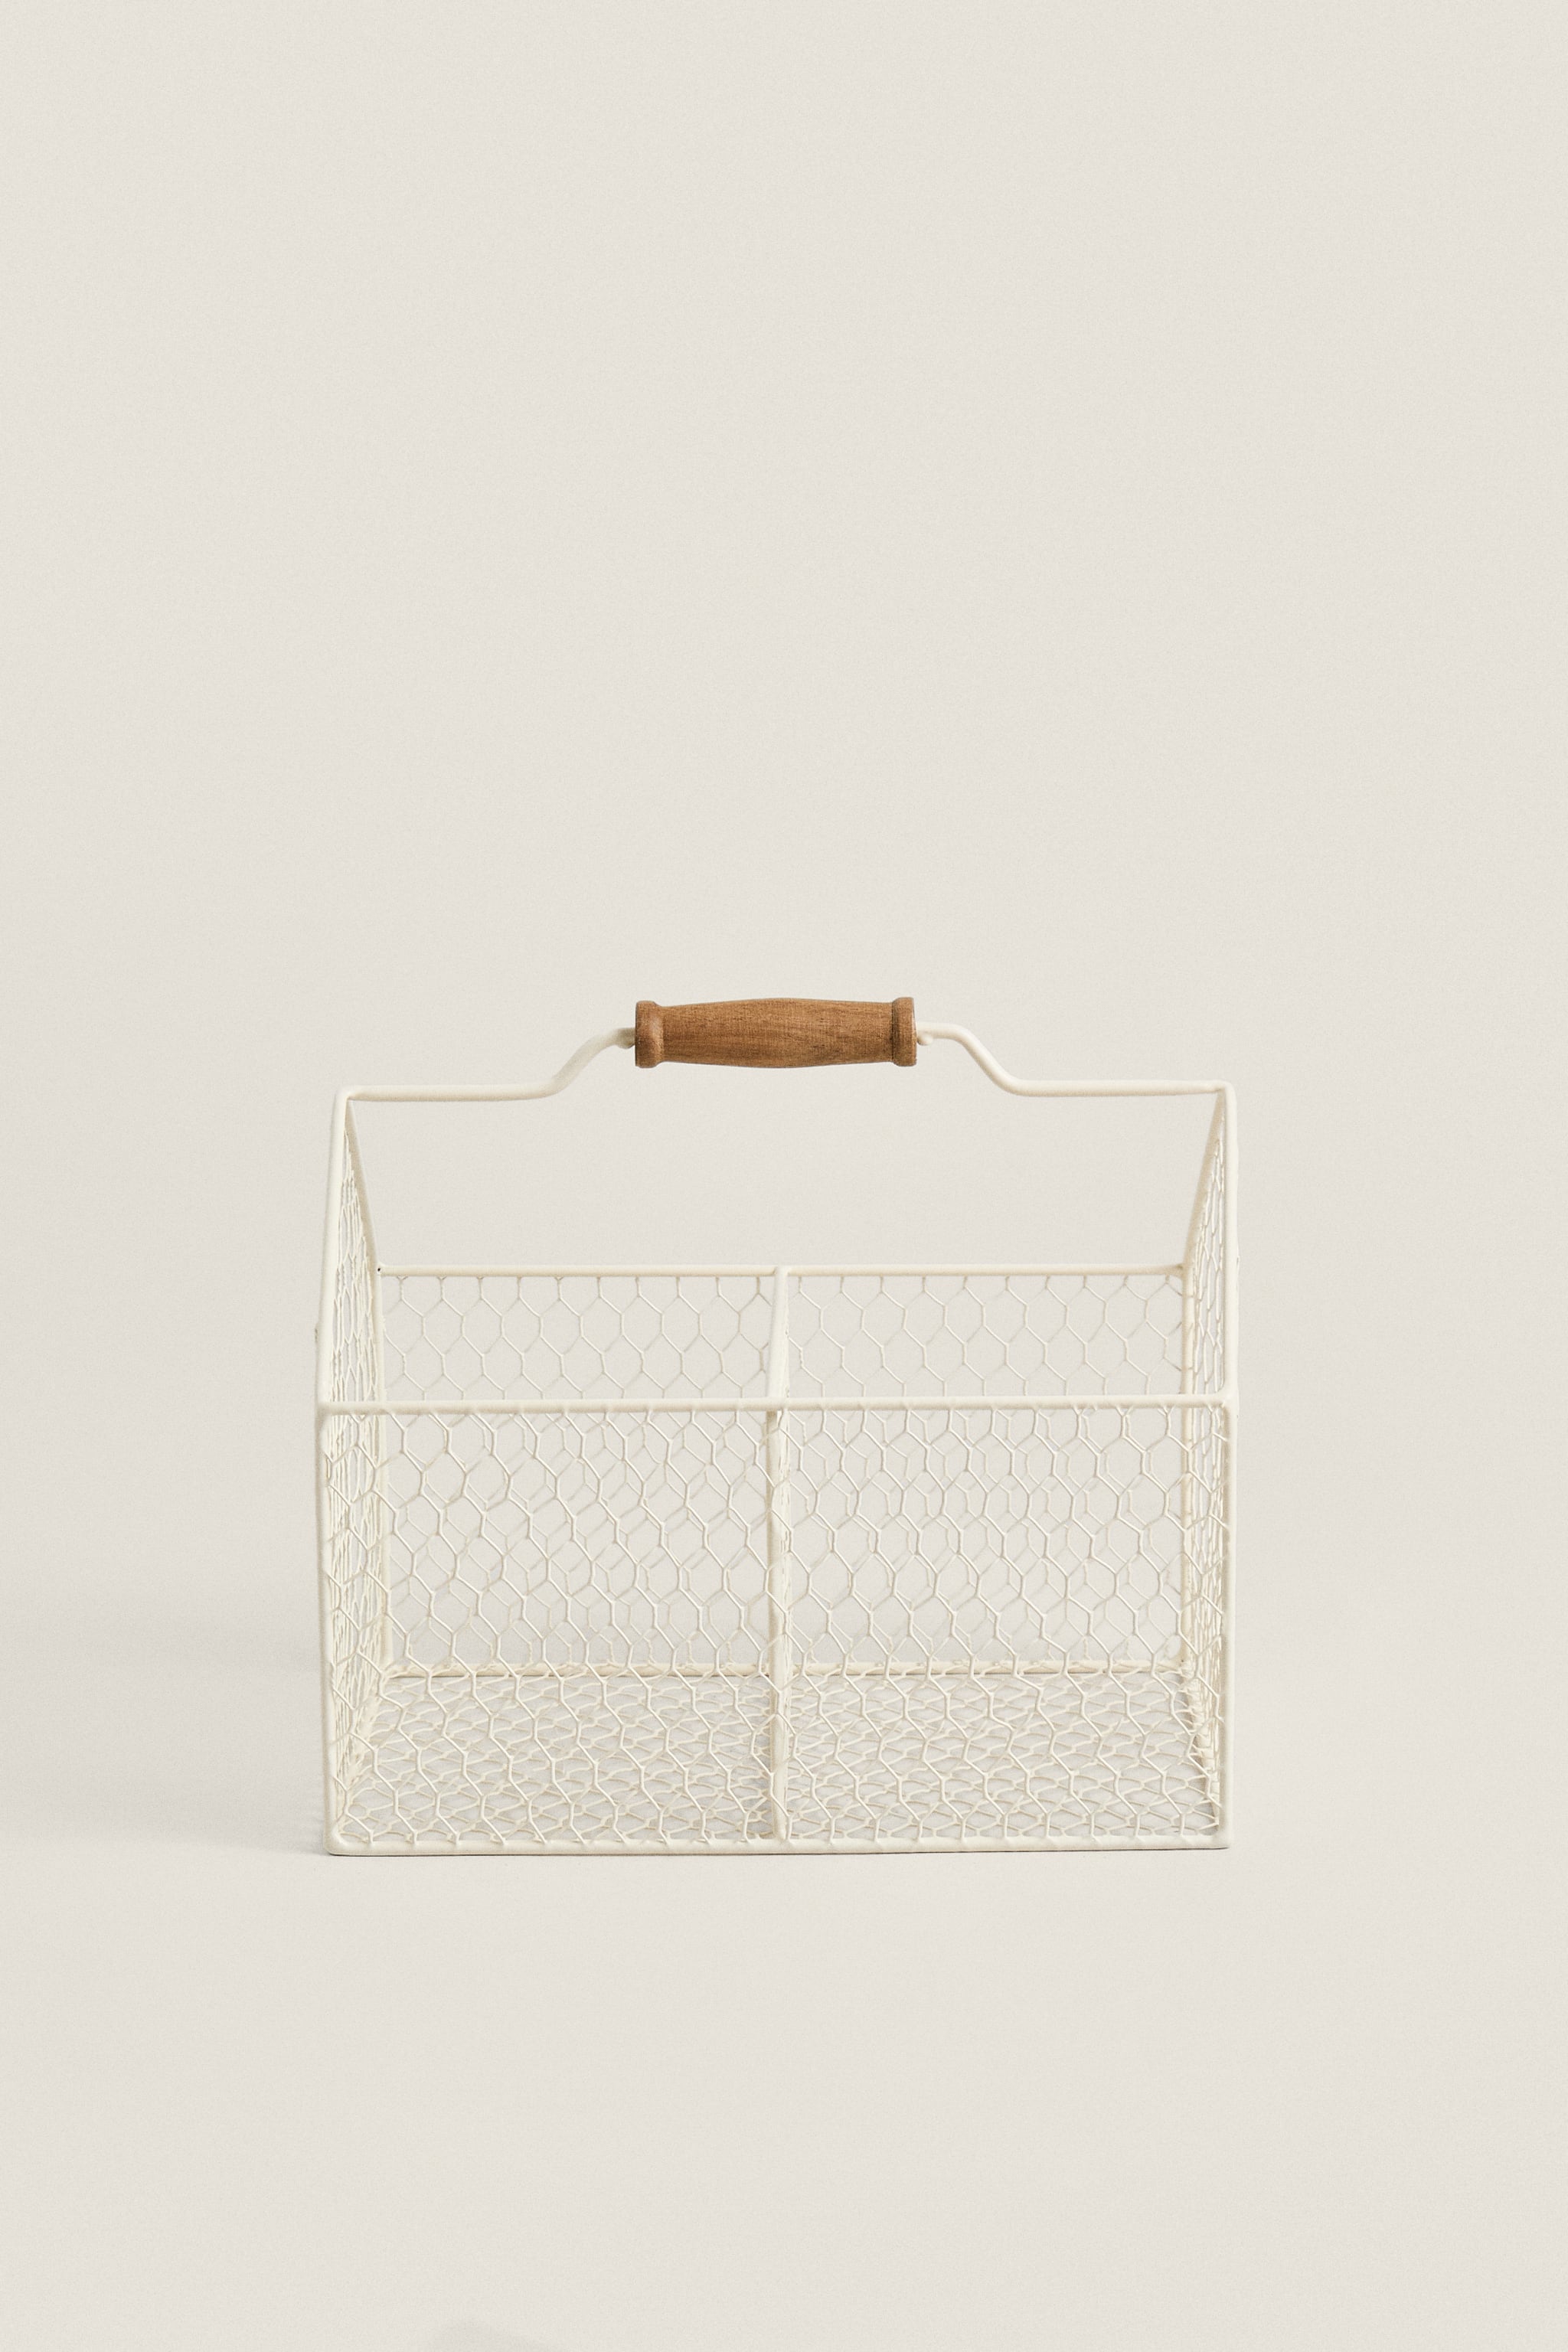 LACQUERED METAL BASKET